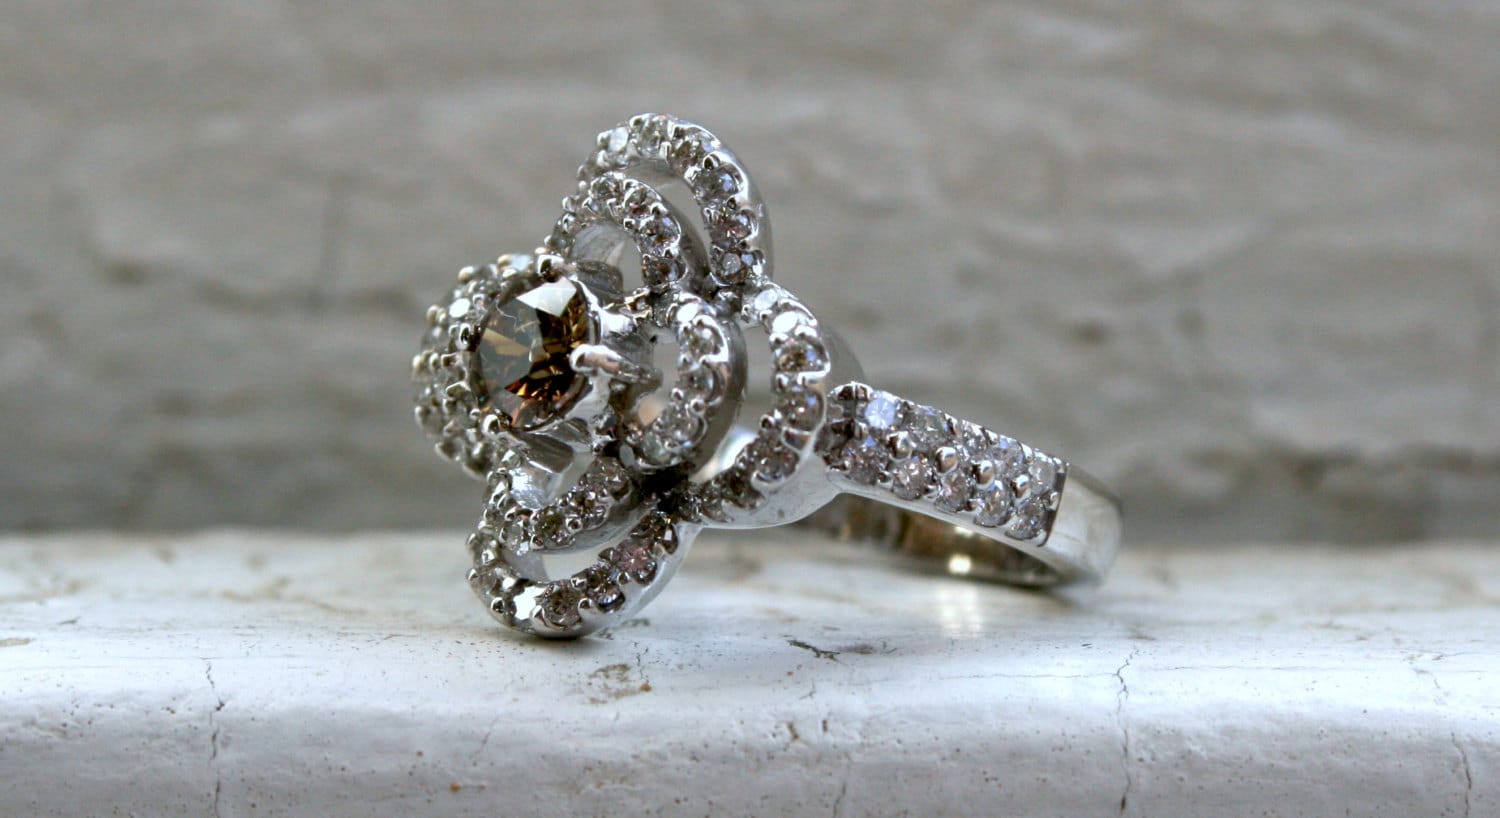 Vintage Floral Diamond and Cognac Diamond Ring Halo Engagement Ring in 14K White Gold - 1.76ct.